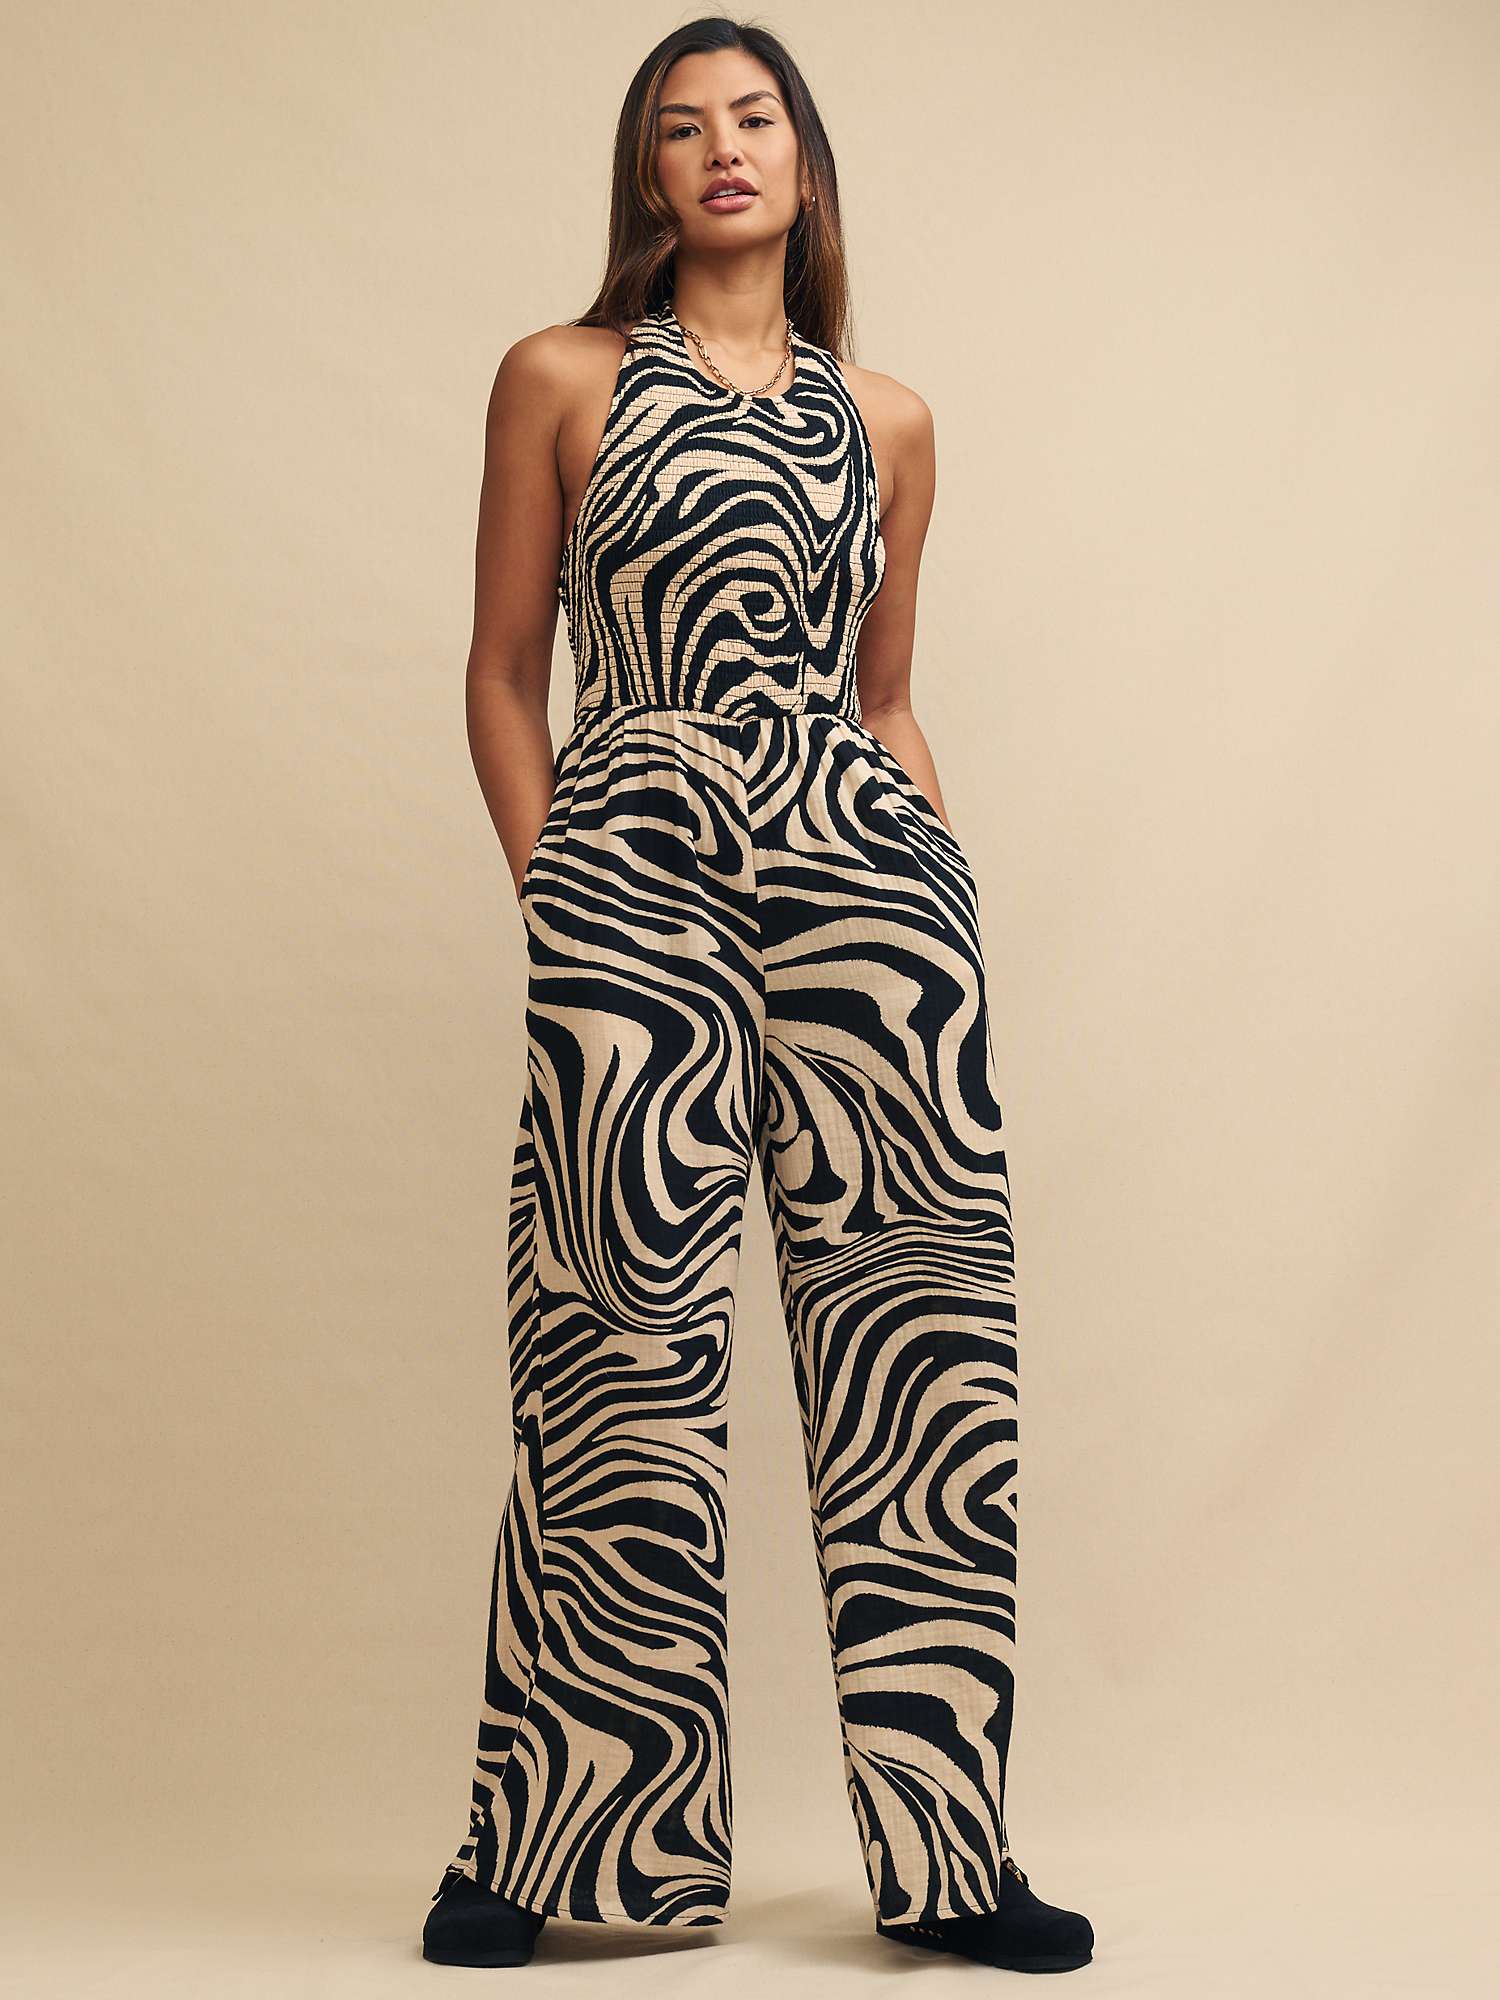 Buy Nobody's Child NicoI Lima Abstract Print Jumpsuit, Black/Multi Online at johnlewis.com